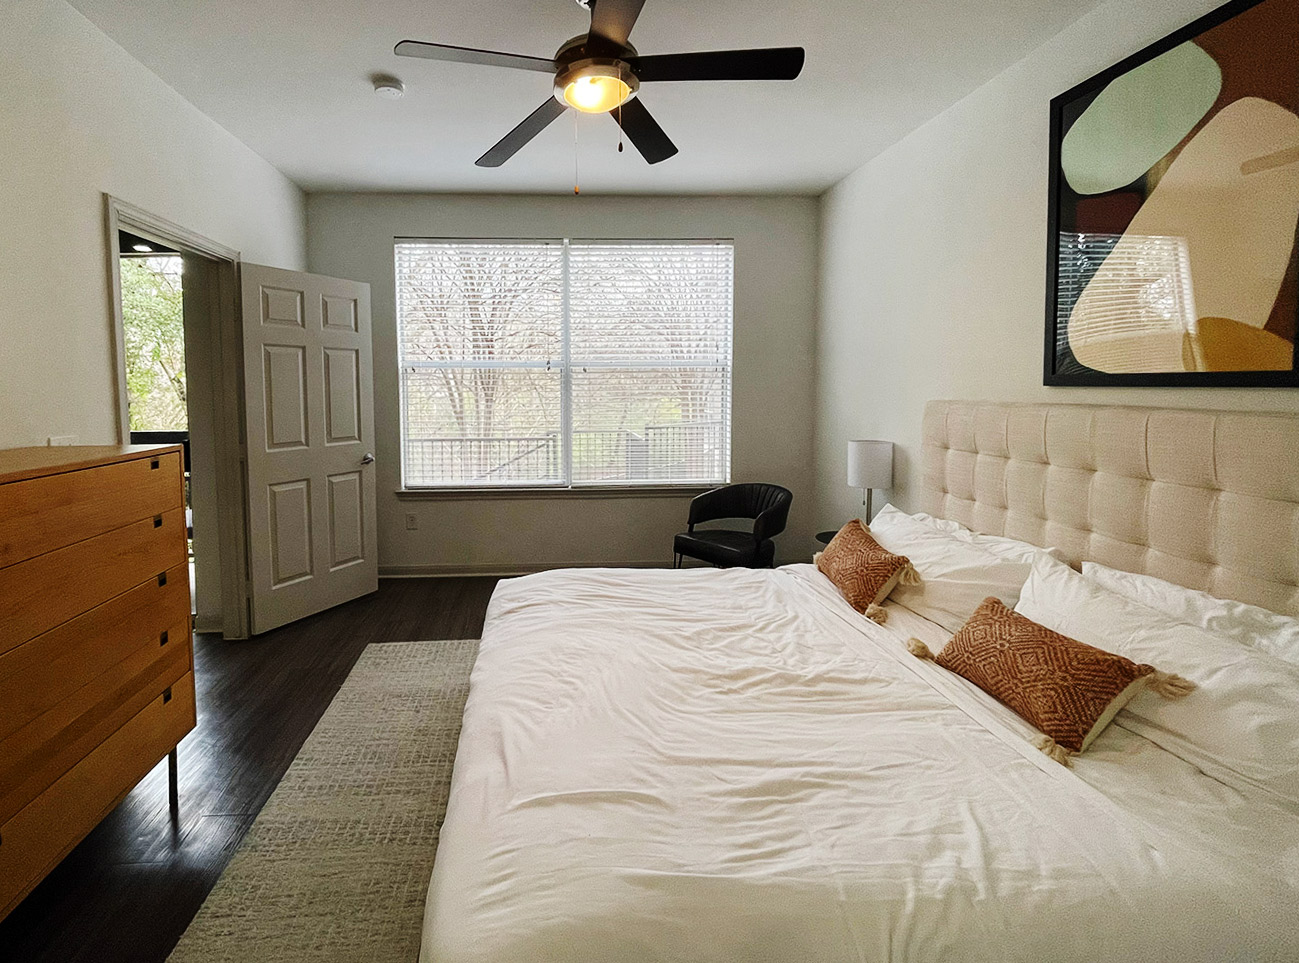 Mint House Austin – South Congress I slept like a baby after a long flight. This apartment came with 3 bedrooms and 2 bathrooms, perfect for traveling with colleagues, friends or family